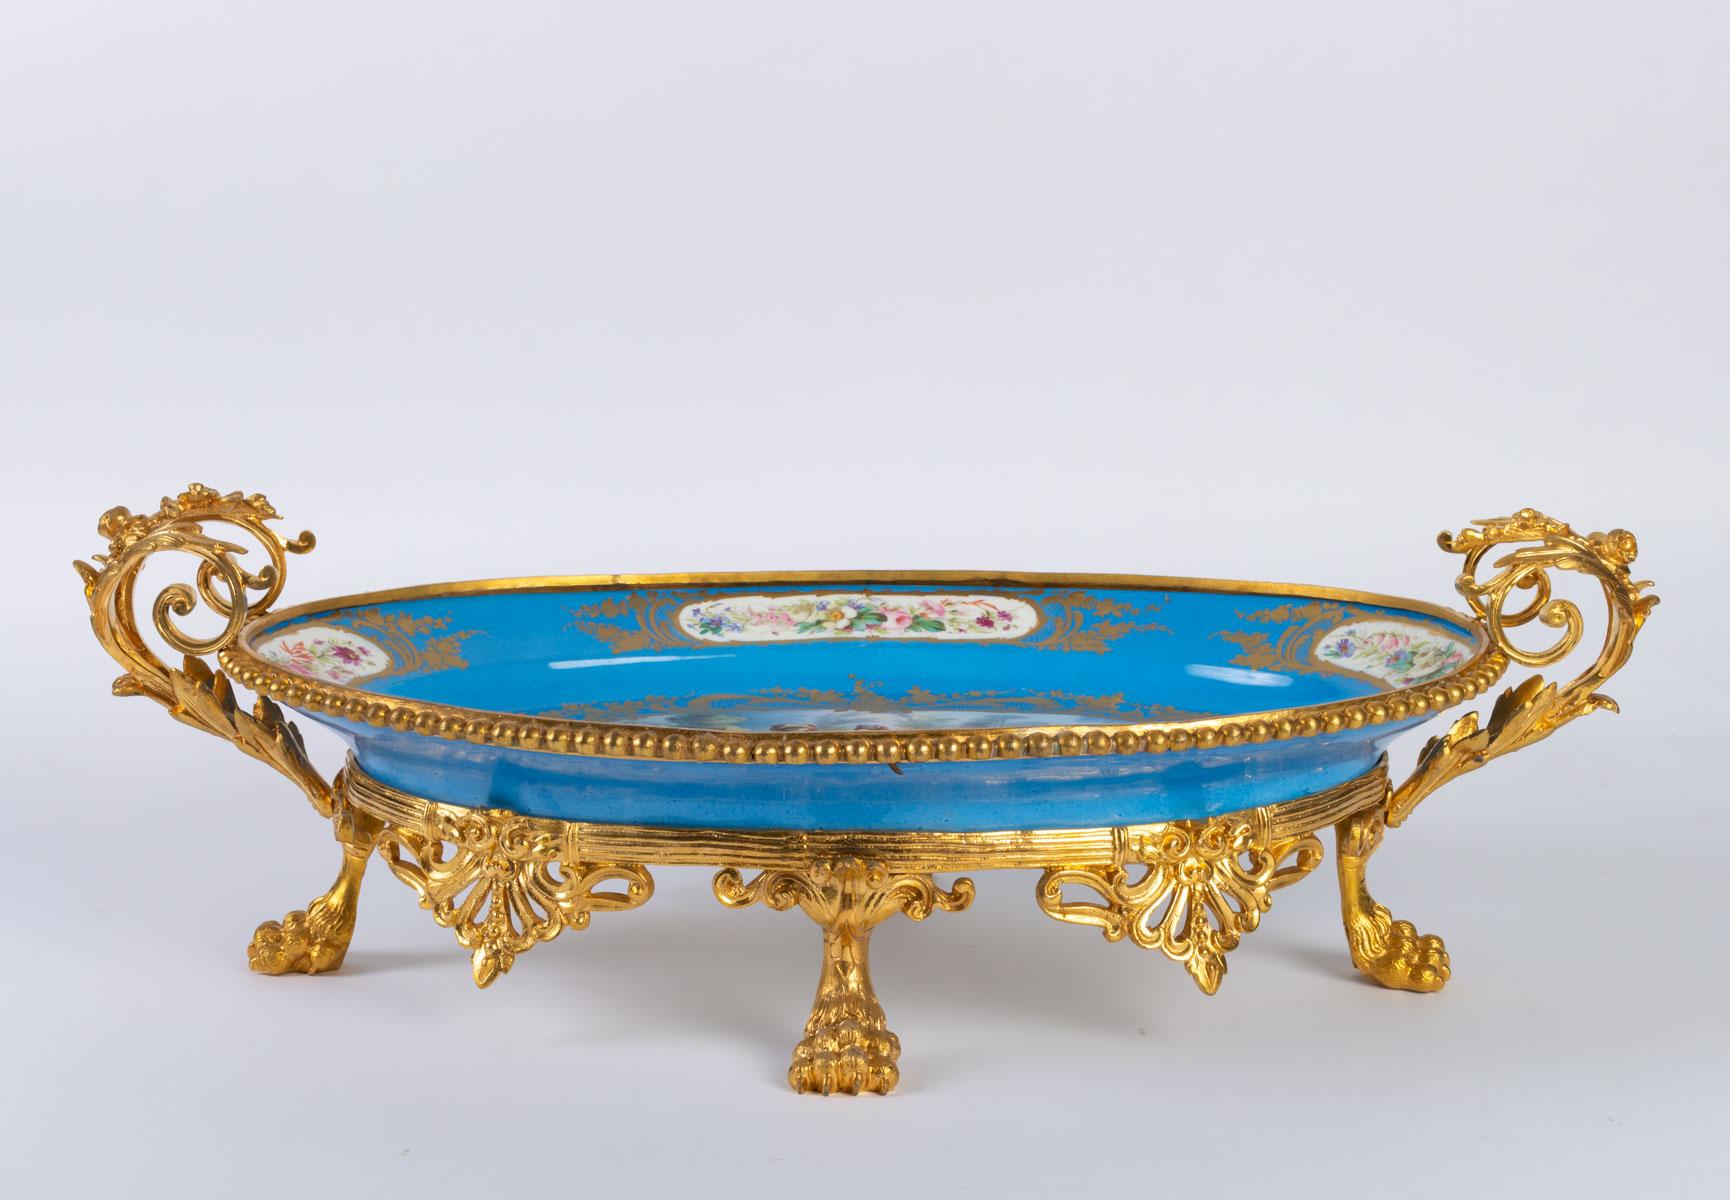 Cup in Sèvres porcelain and gilded bronze, with gallant scene decoration, Napoleon III period, 19th century.
H: 20 cm, W: 62 cm, D: 34 cm.